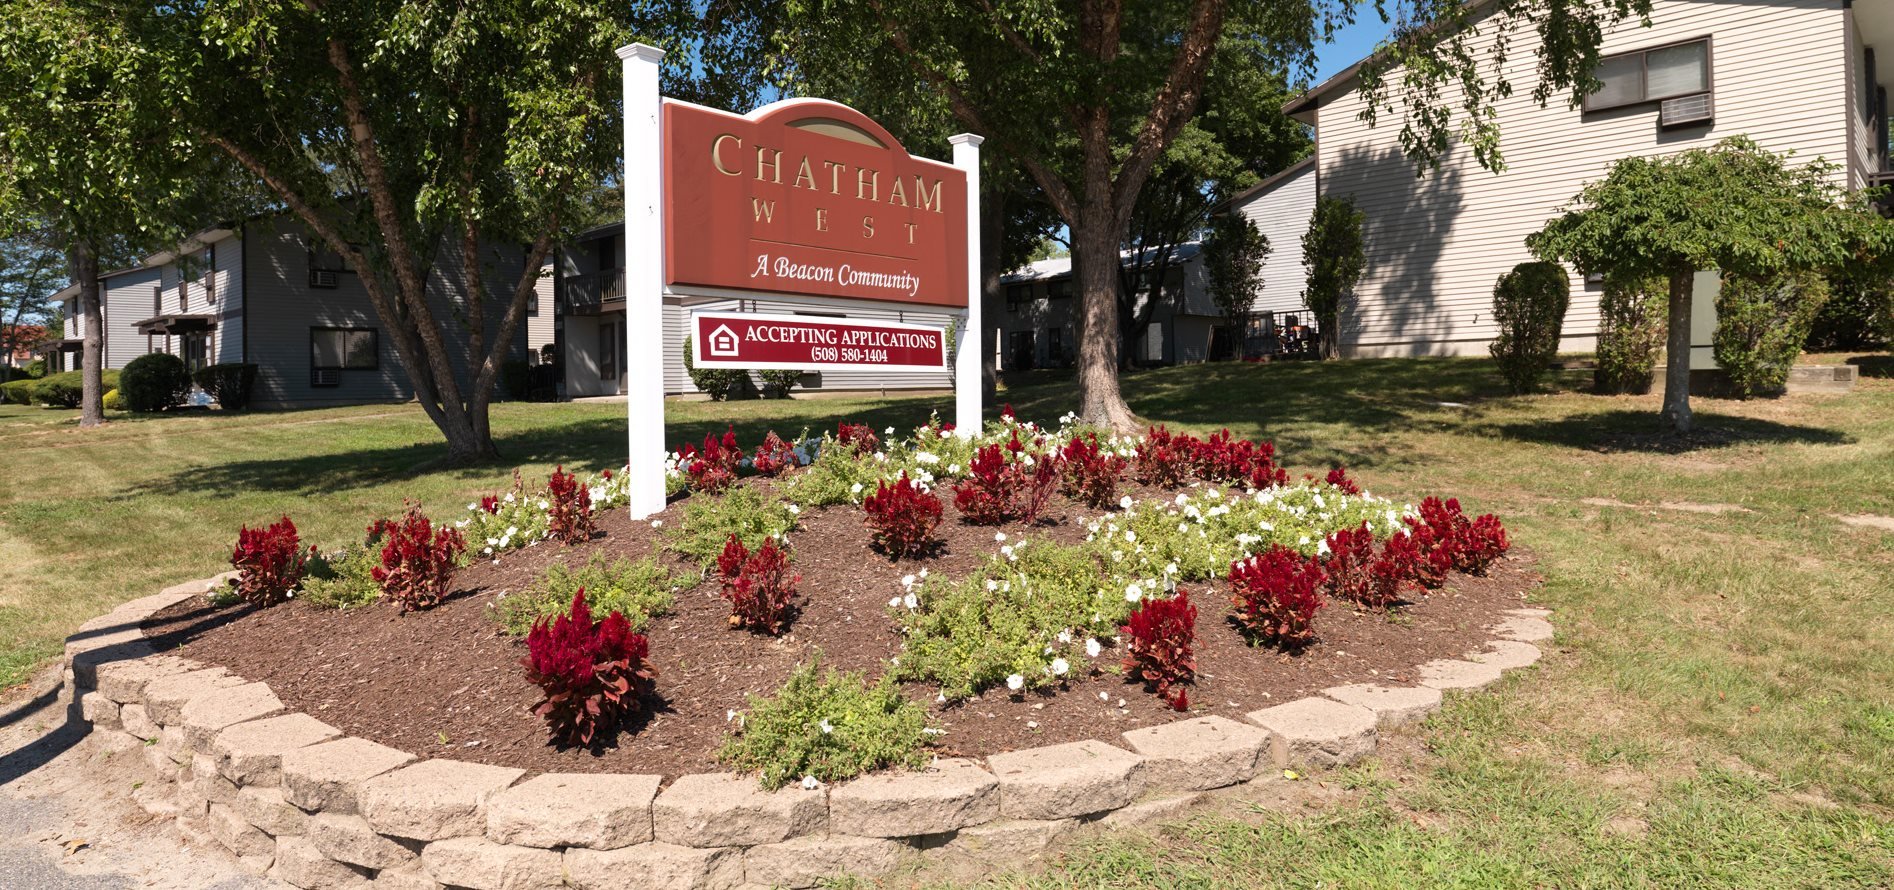 Chatham West Apartments In Brockton Ma